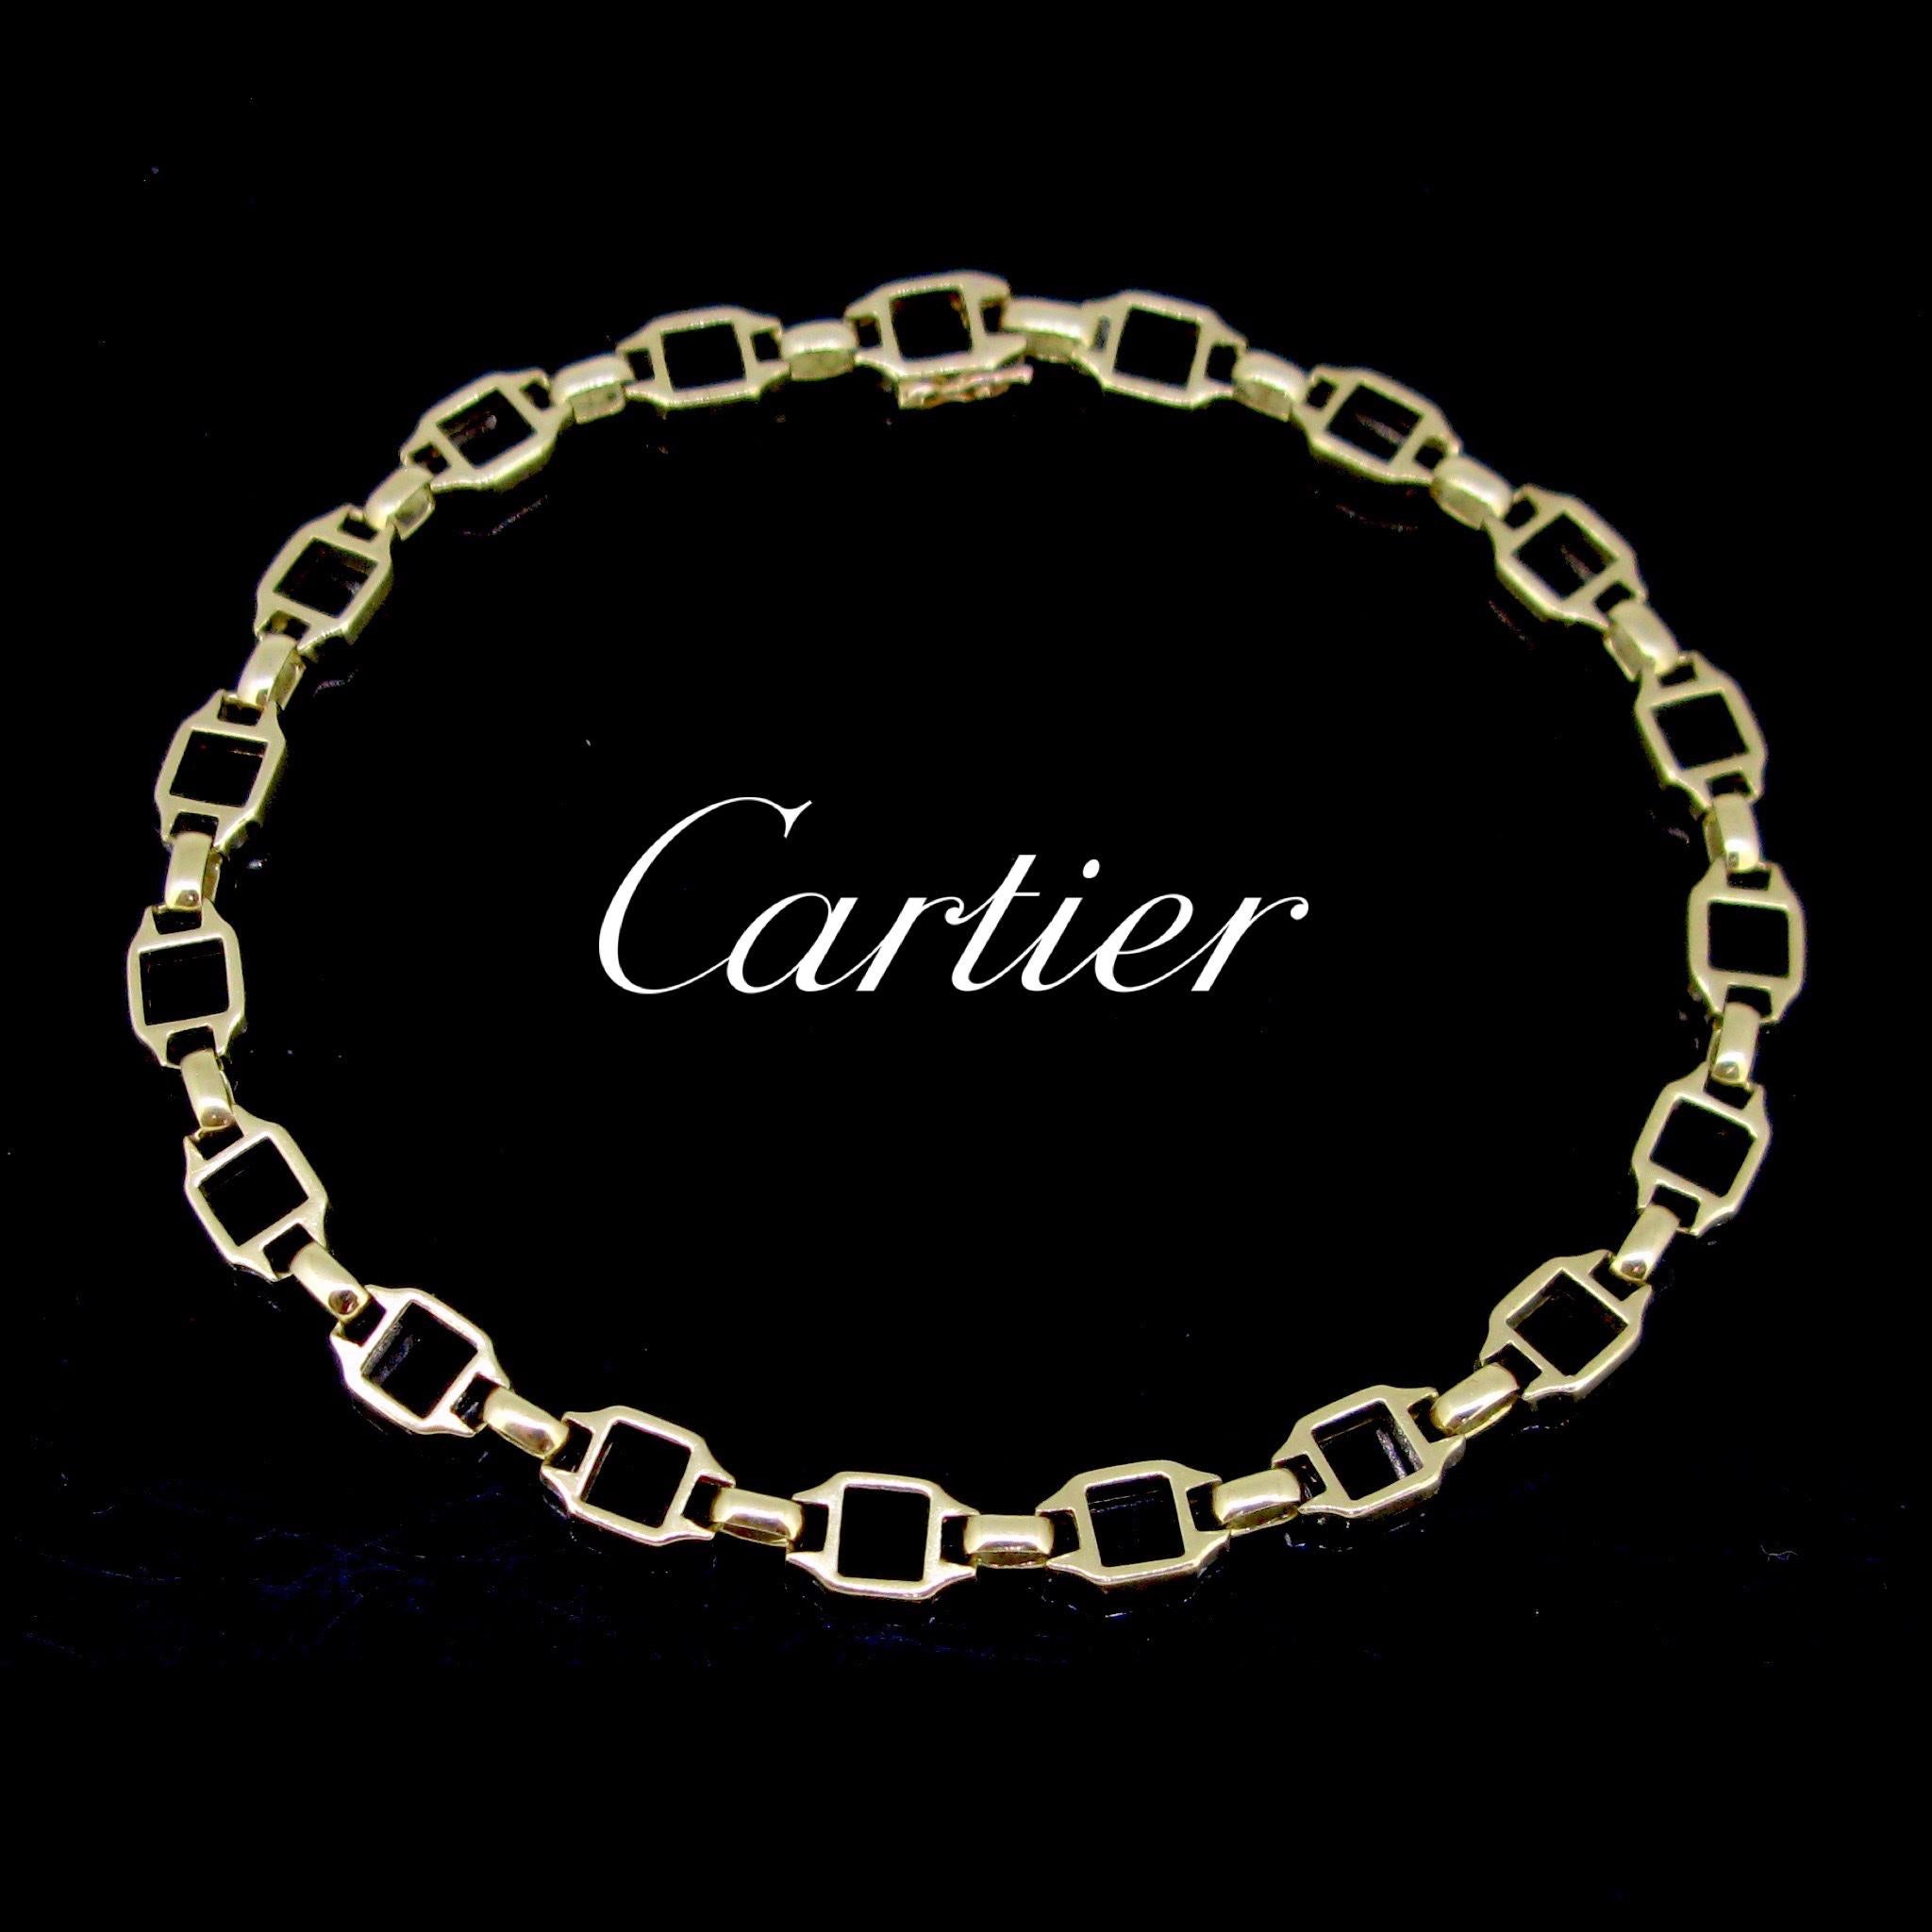 Weight: 9.41gr

Metal: 18kt yellow Gold

Condition: Very Good

Hallmarks: French, eagle’s head

Signature: Cartier nº11933

Comments: This bracelet is made in 18kt yellow gold. It is the Santos link chain bracelet. It is signed and numbered . It is